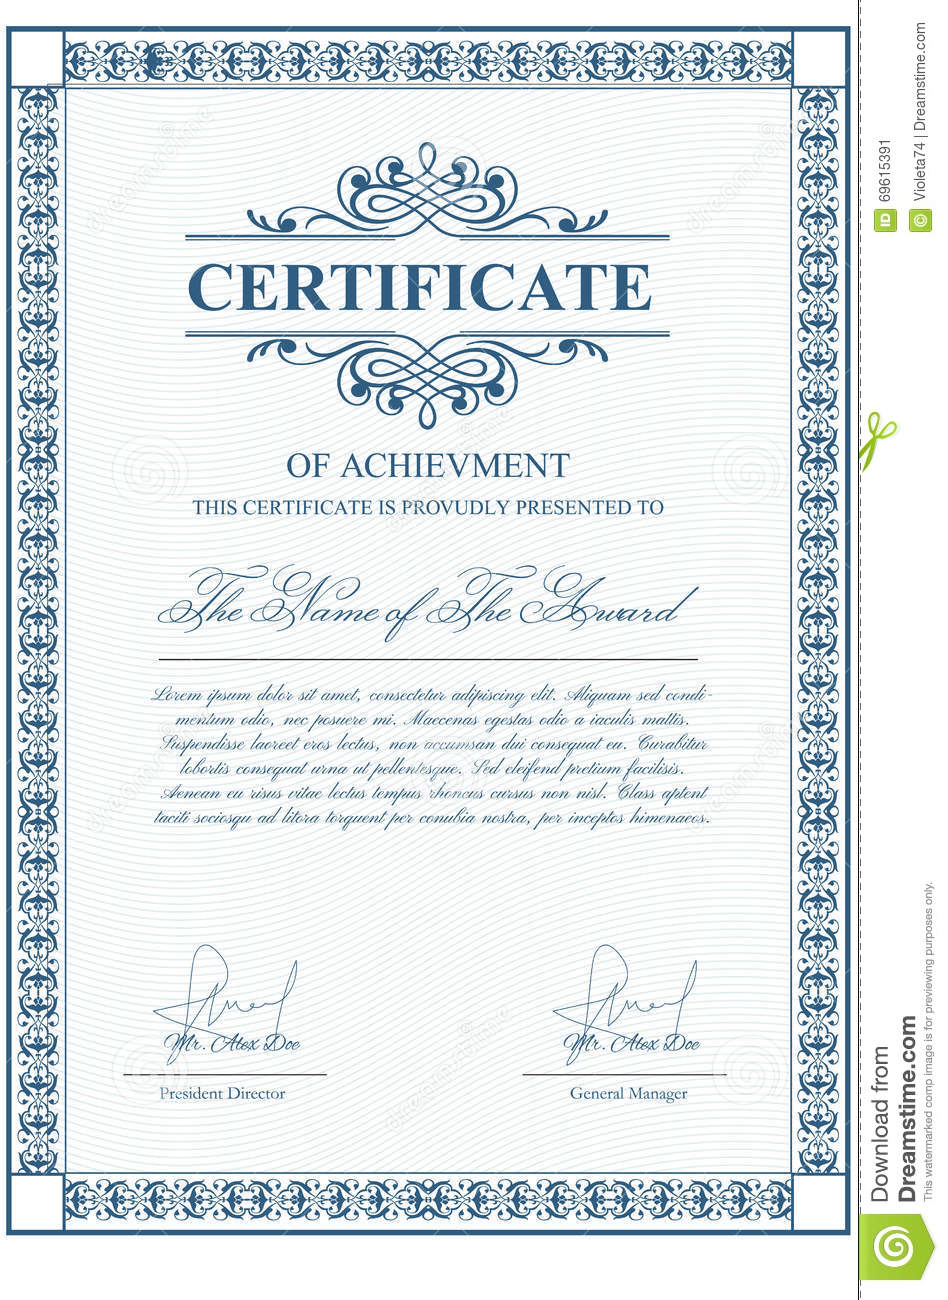 Certificate Template With Guilloche Elements